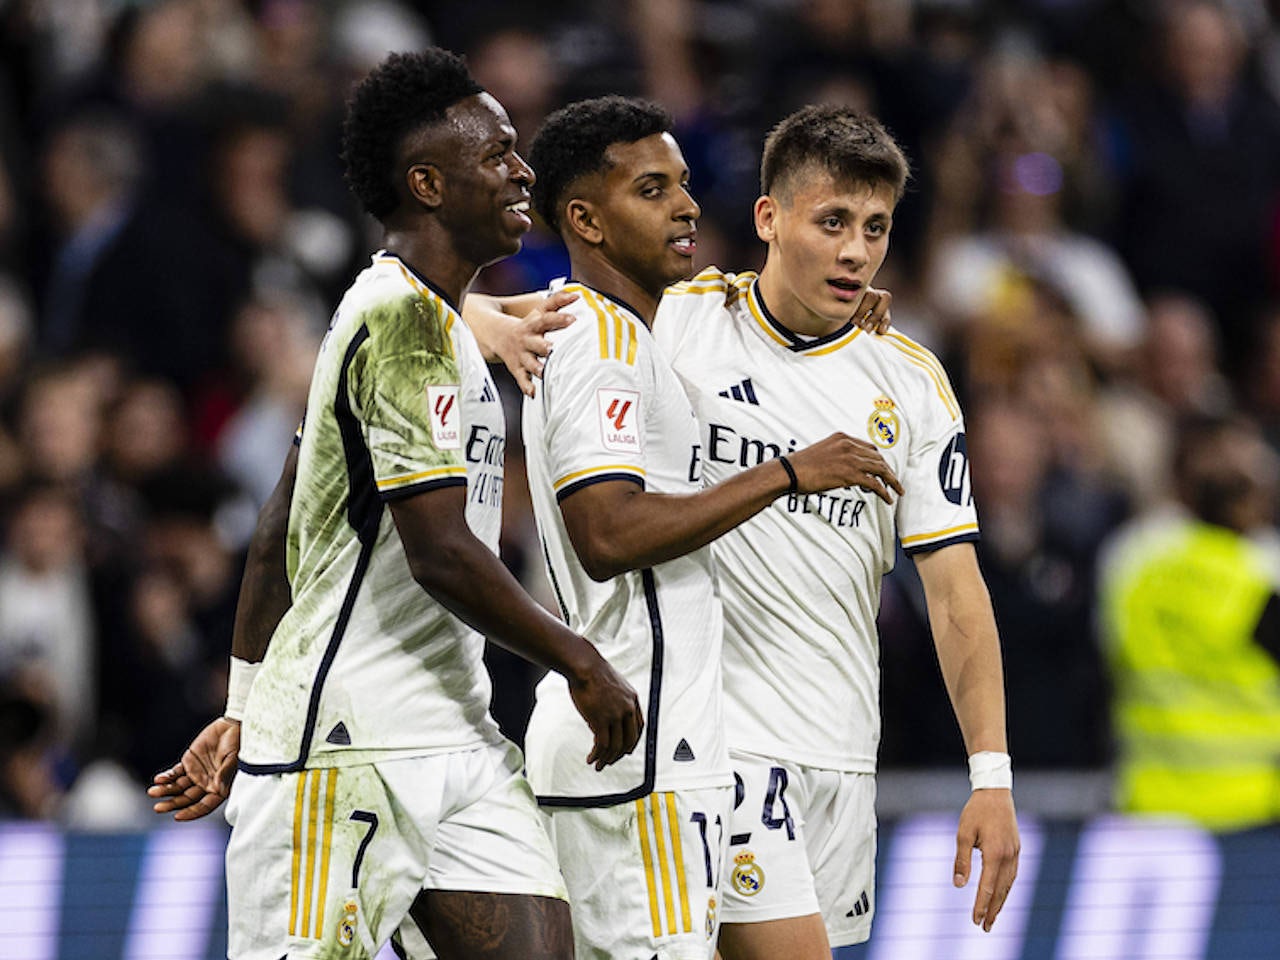 Real Madrid 'make decision' on attacker's future after Mbappe, Endrick arrivals